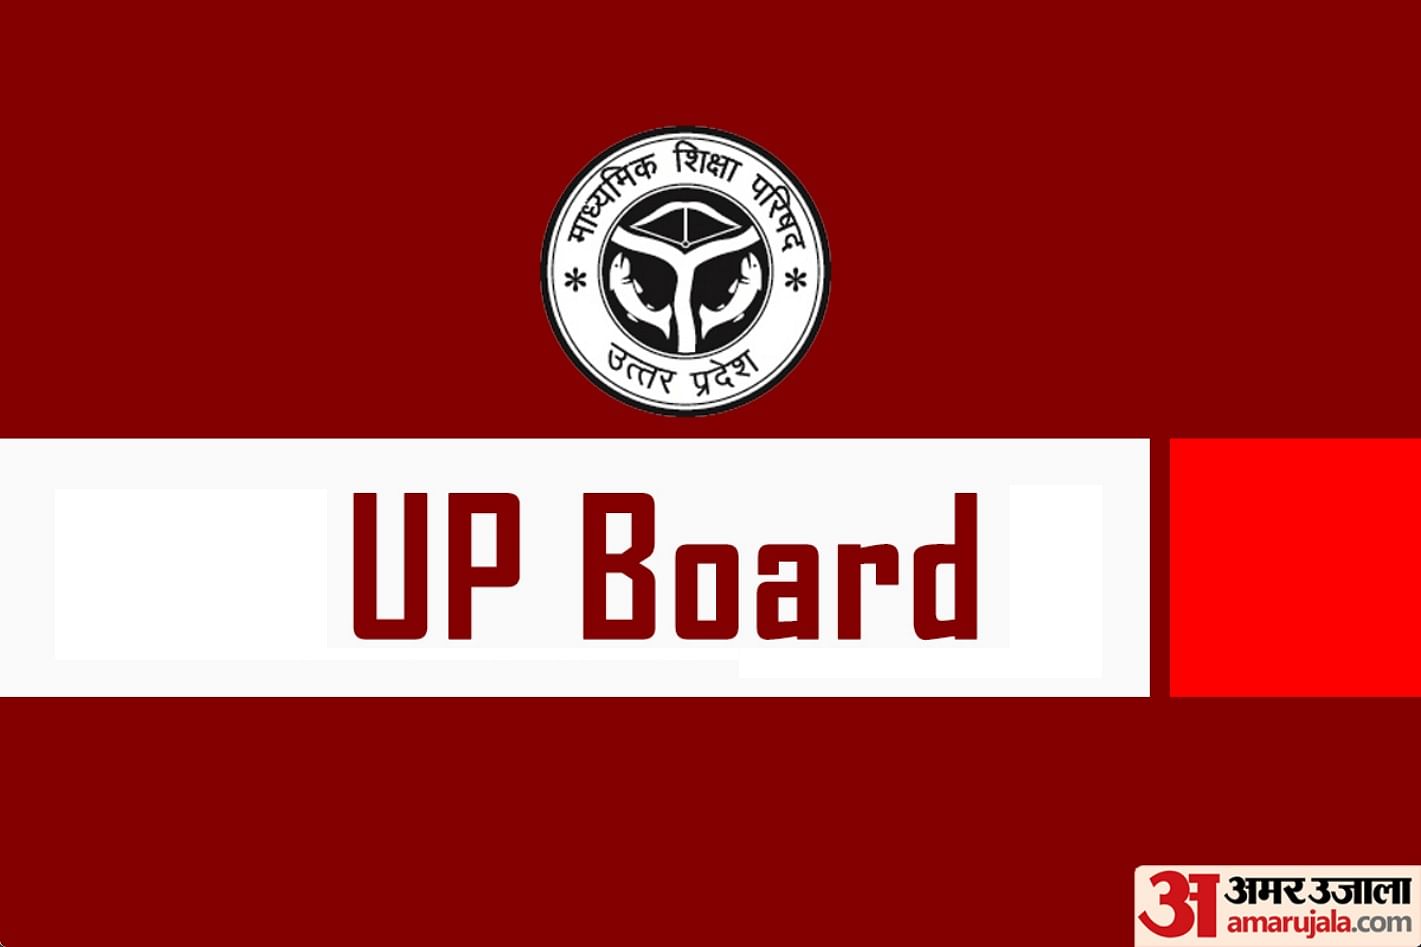 UP Board 2021-22: Application Last Date Further Extended till November 20, Fresh Updates Here